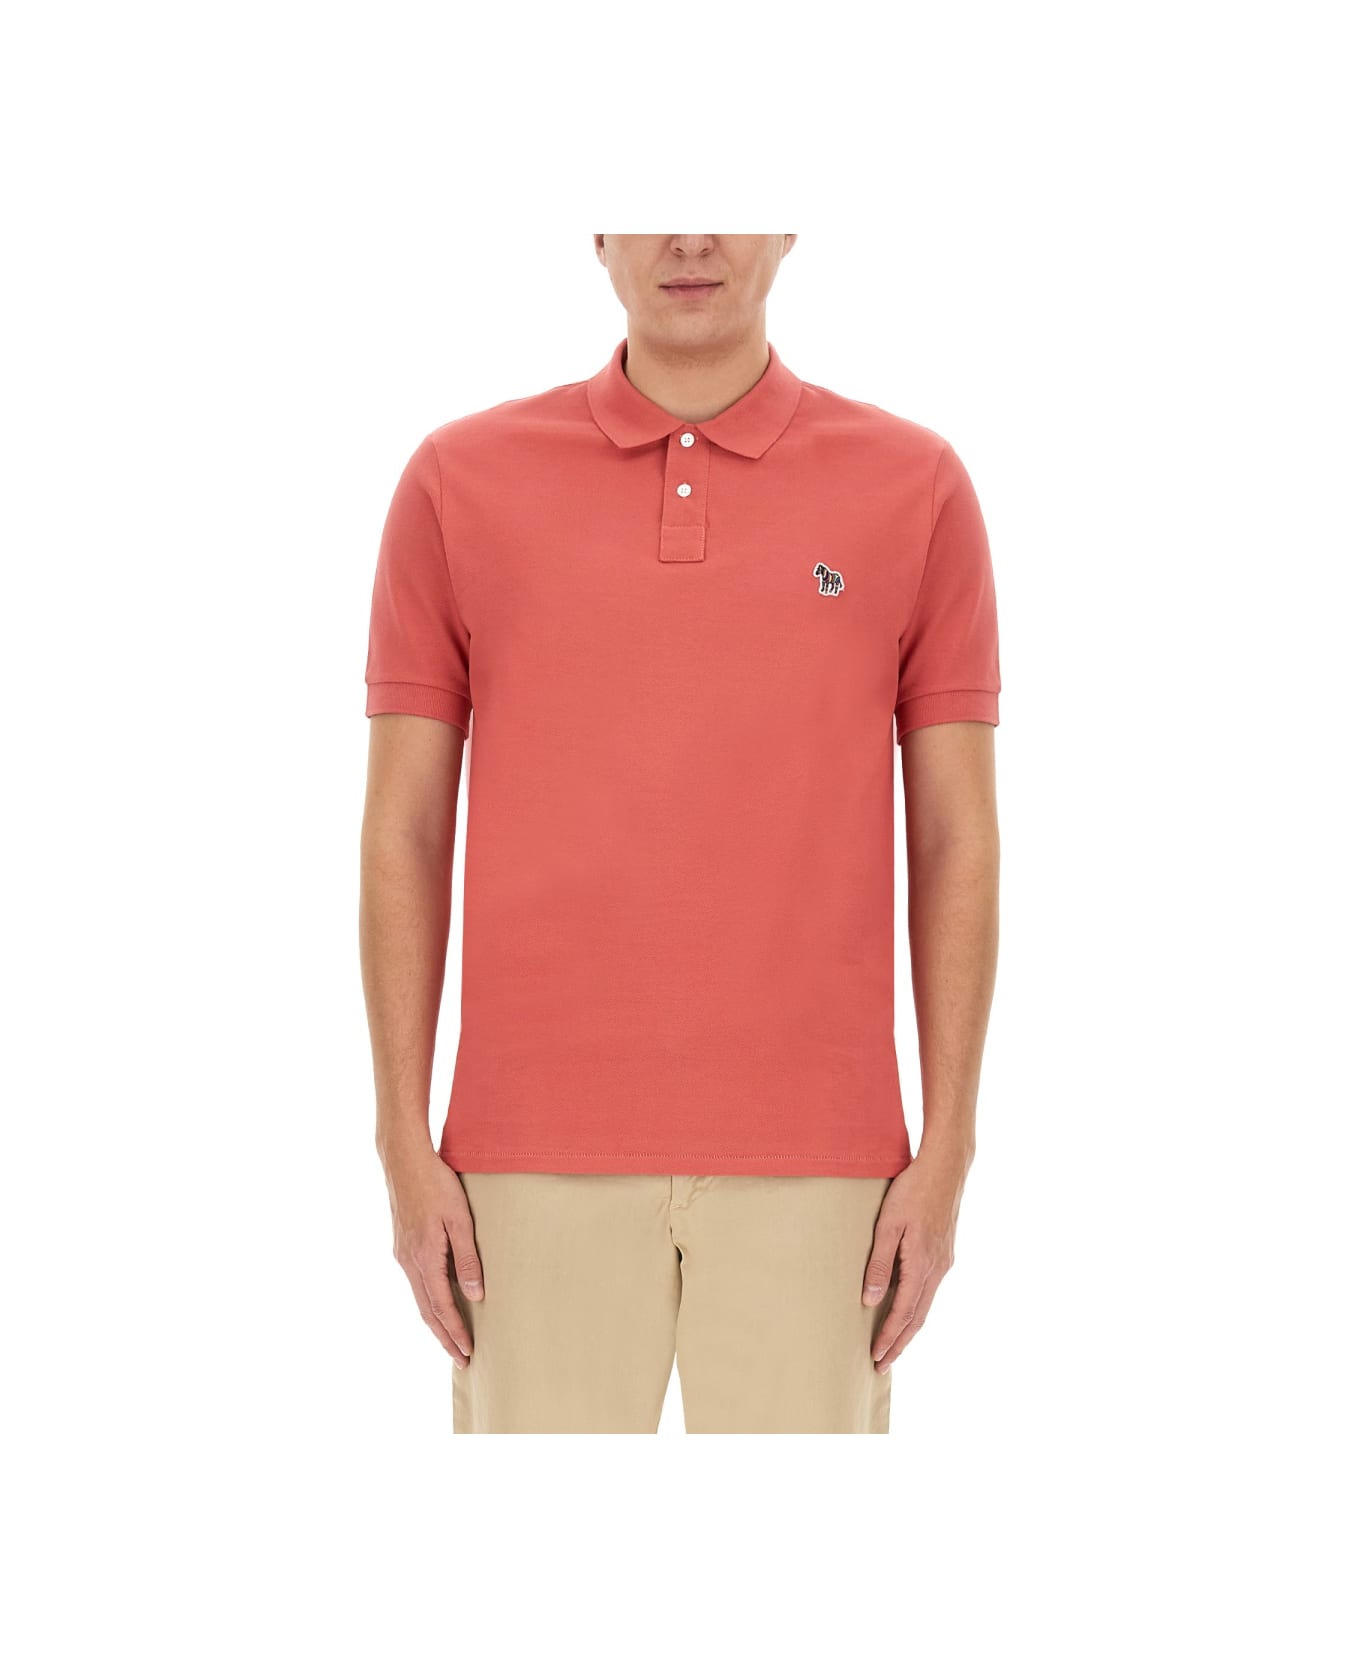 PS by Paul Smith Polo Shirt With Zebra Patch - PINK